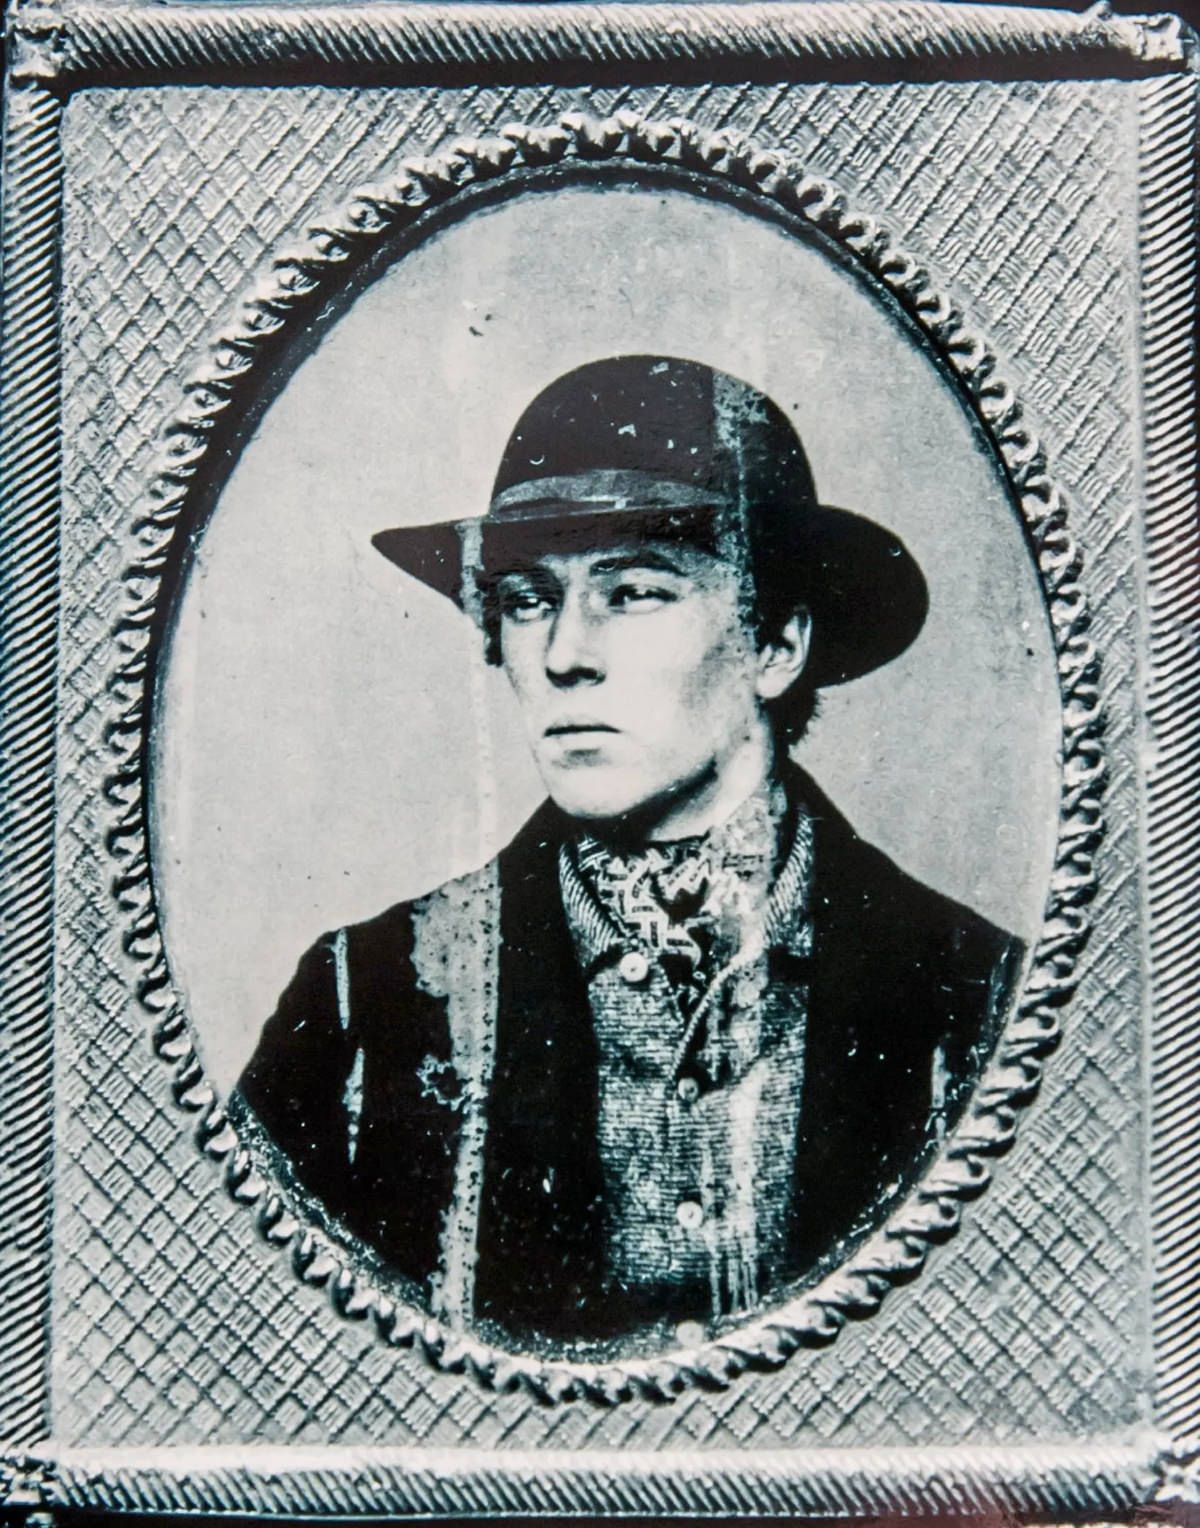 James Freeth was pictured in February 1861, but his crime is no longer known.